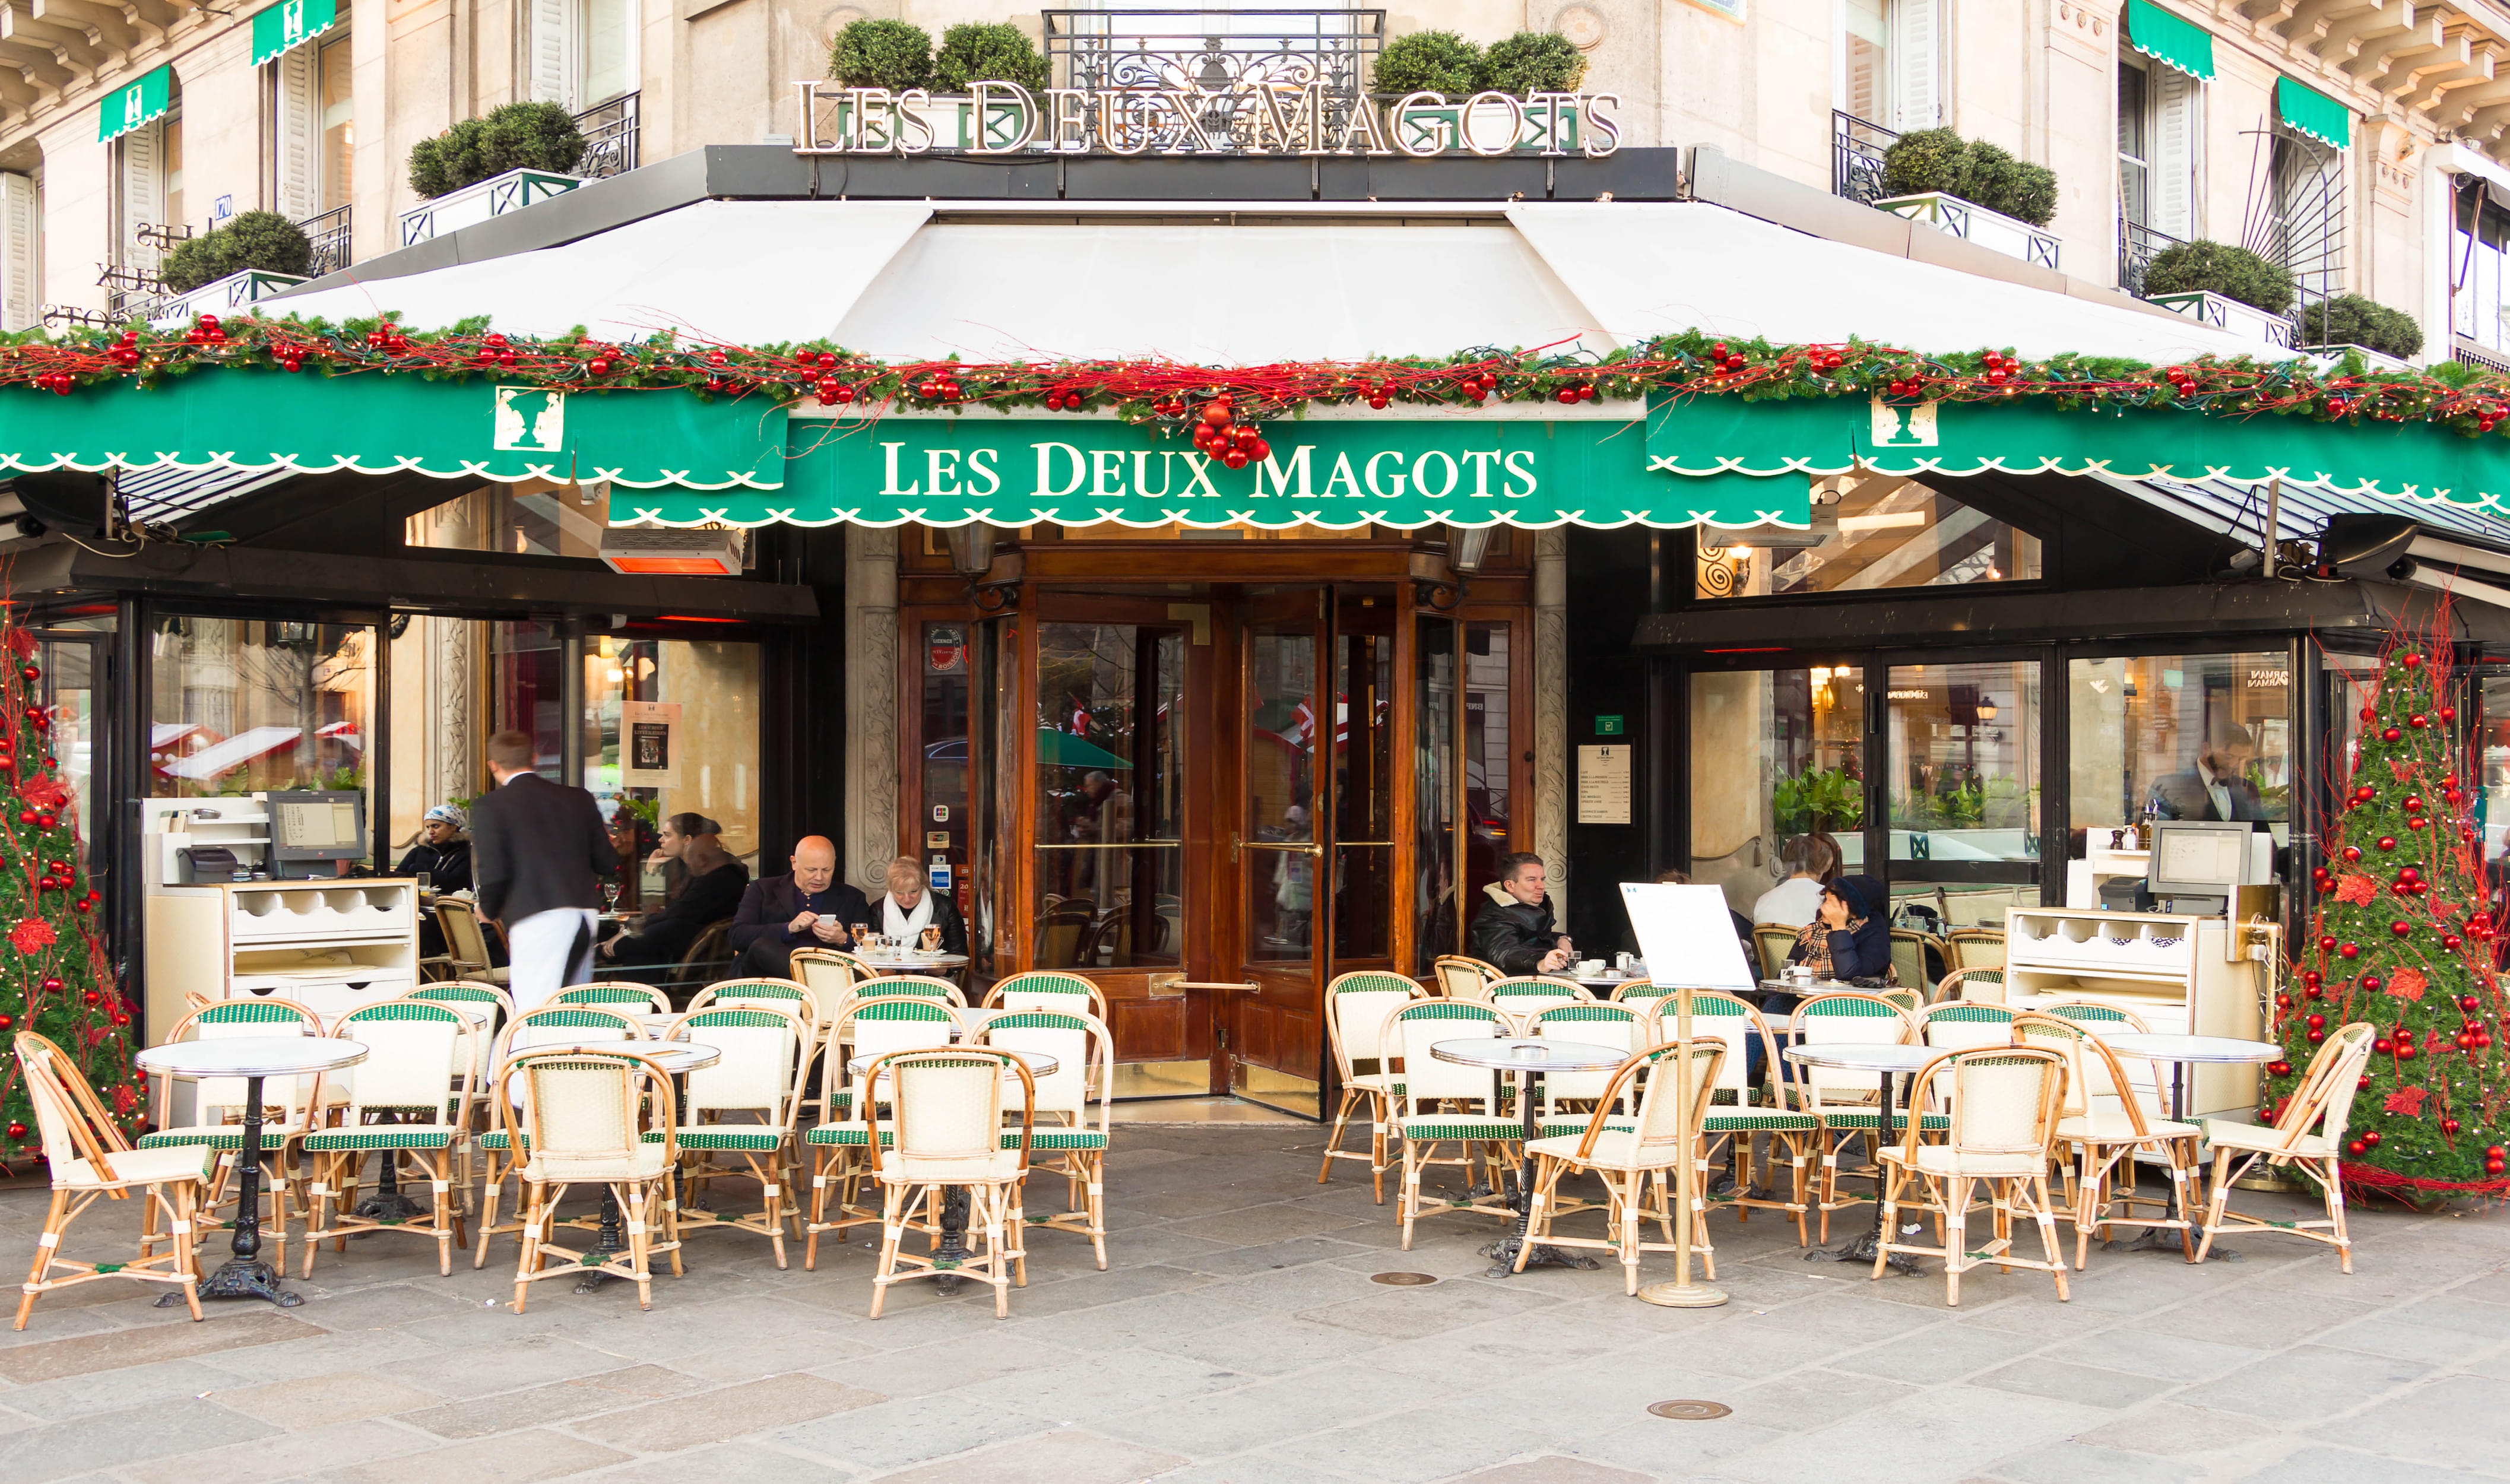 Literary Cafes of the boulevard of Saint Germain des Pres